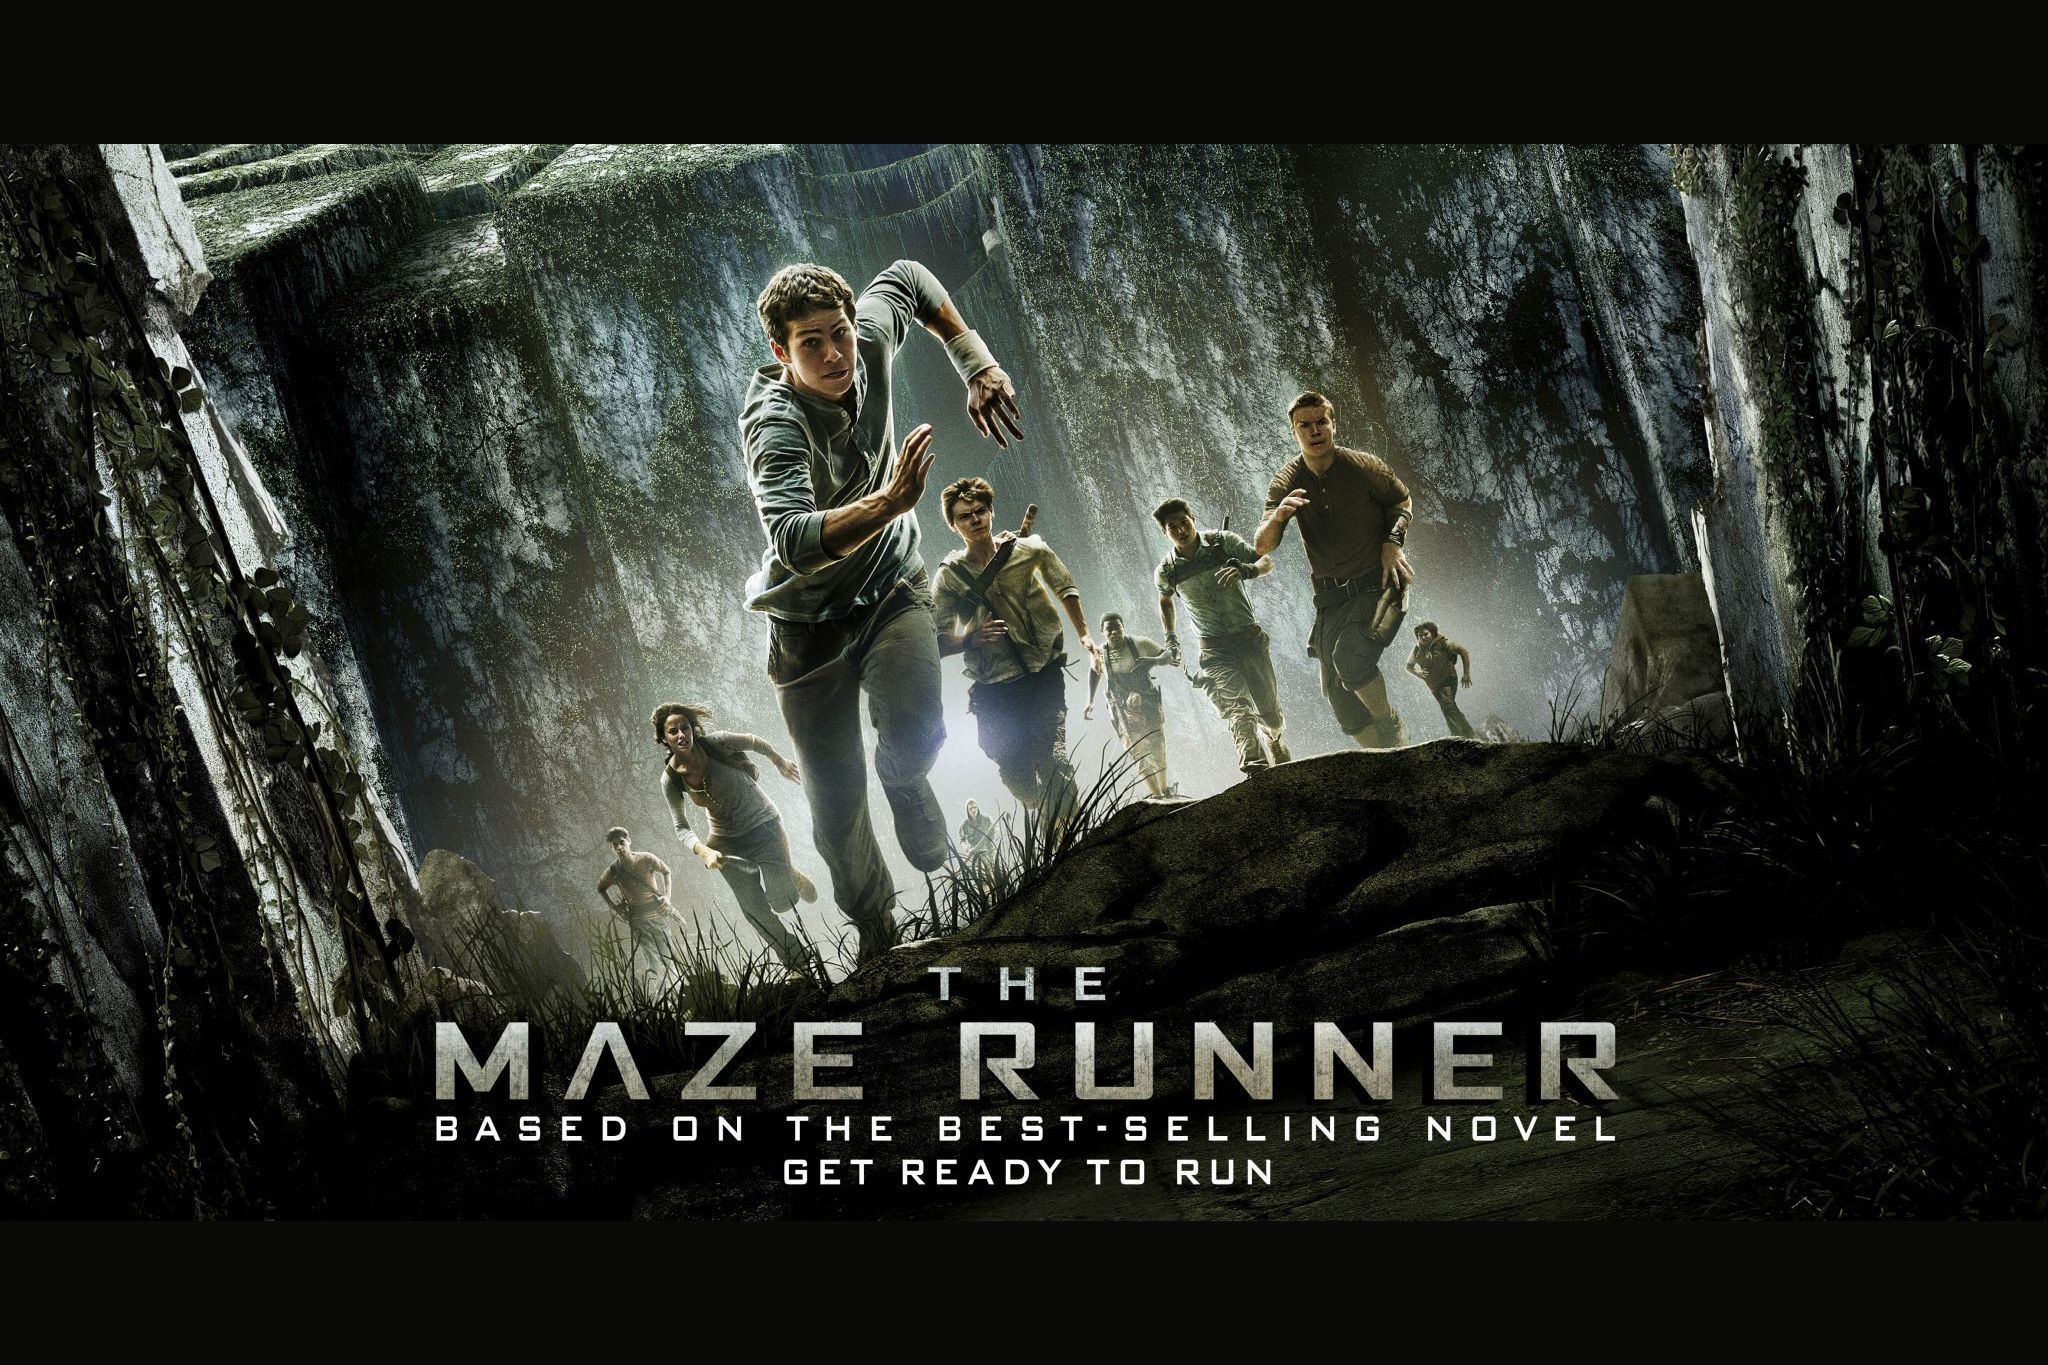 What Maze Runner Cast Member are you Most Like? - Quiz